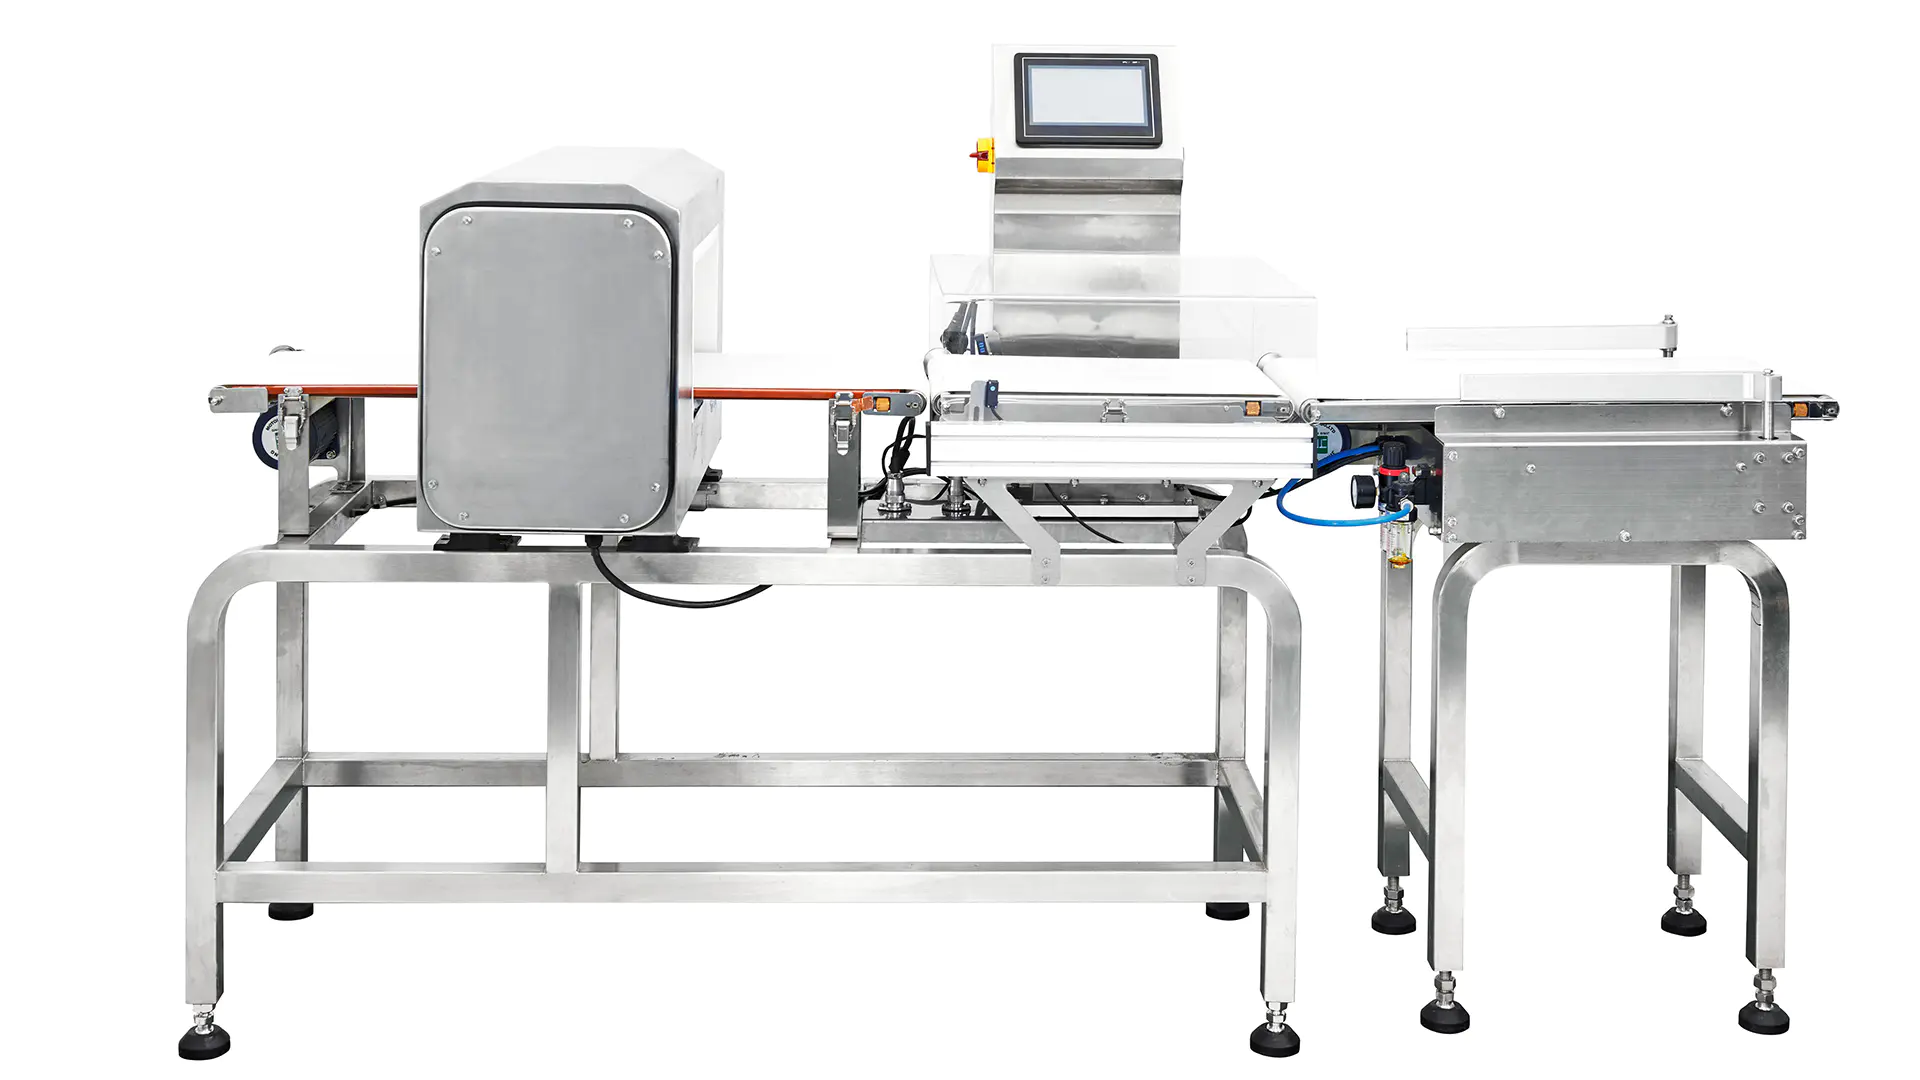 Combined check weigher and food metal detector